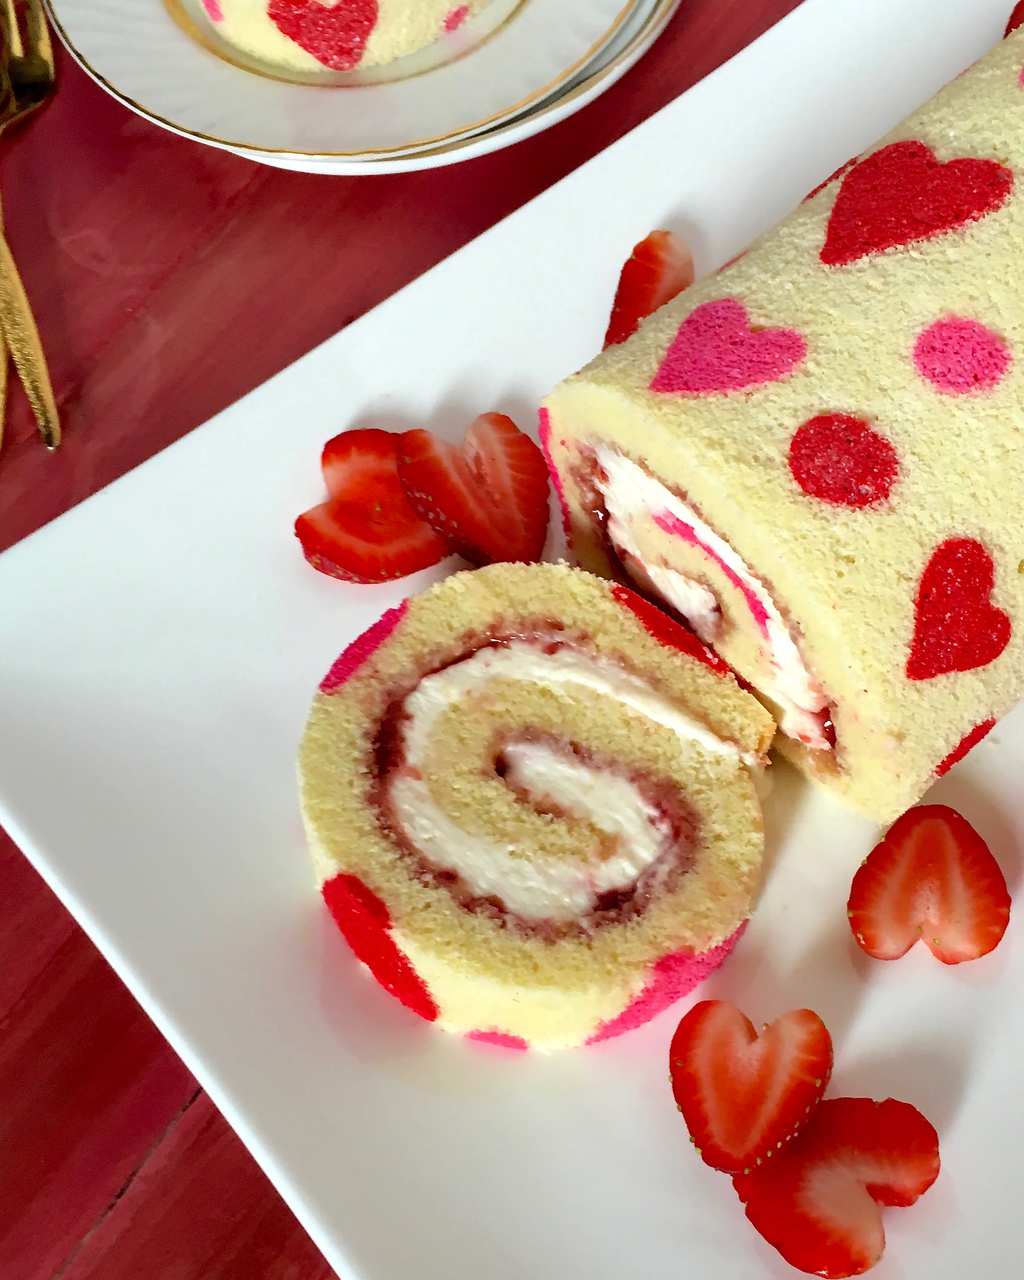 A strawberry jelly roll cake, sliced once